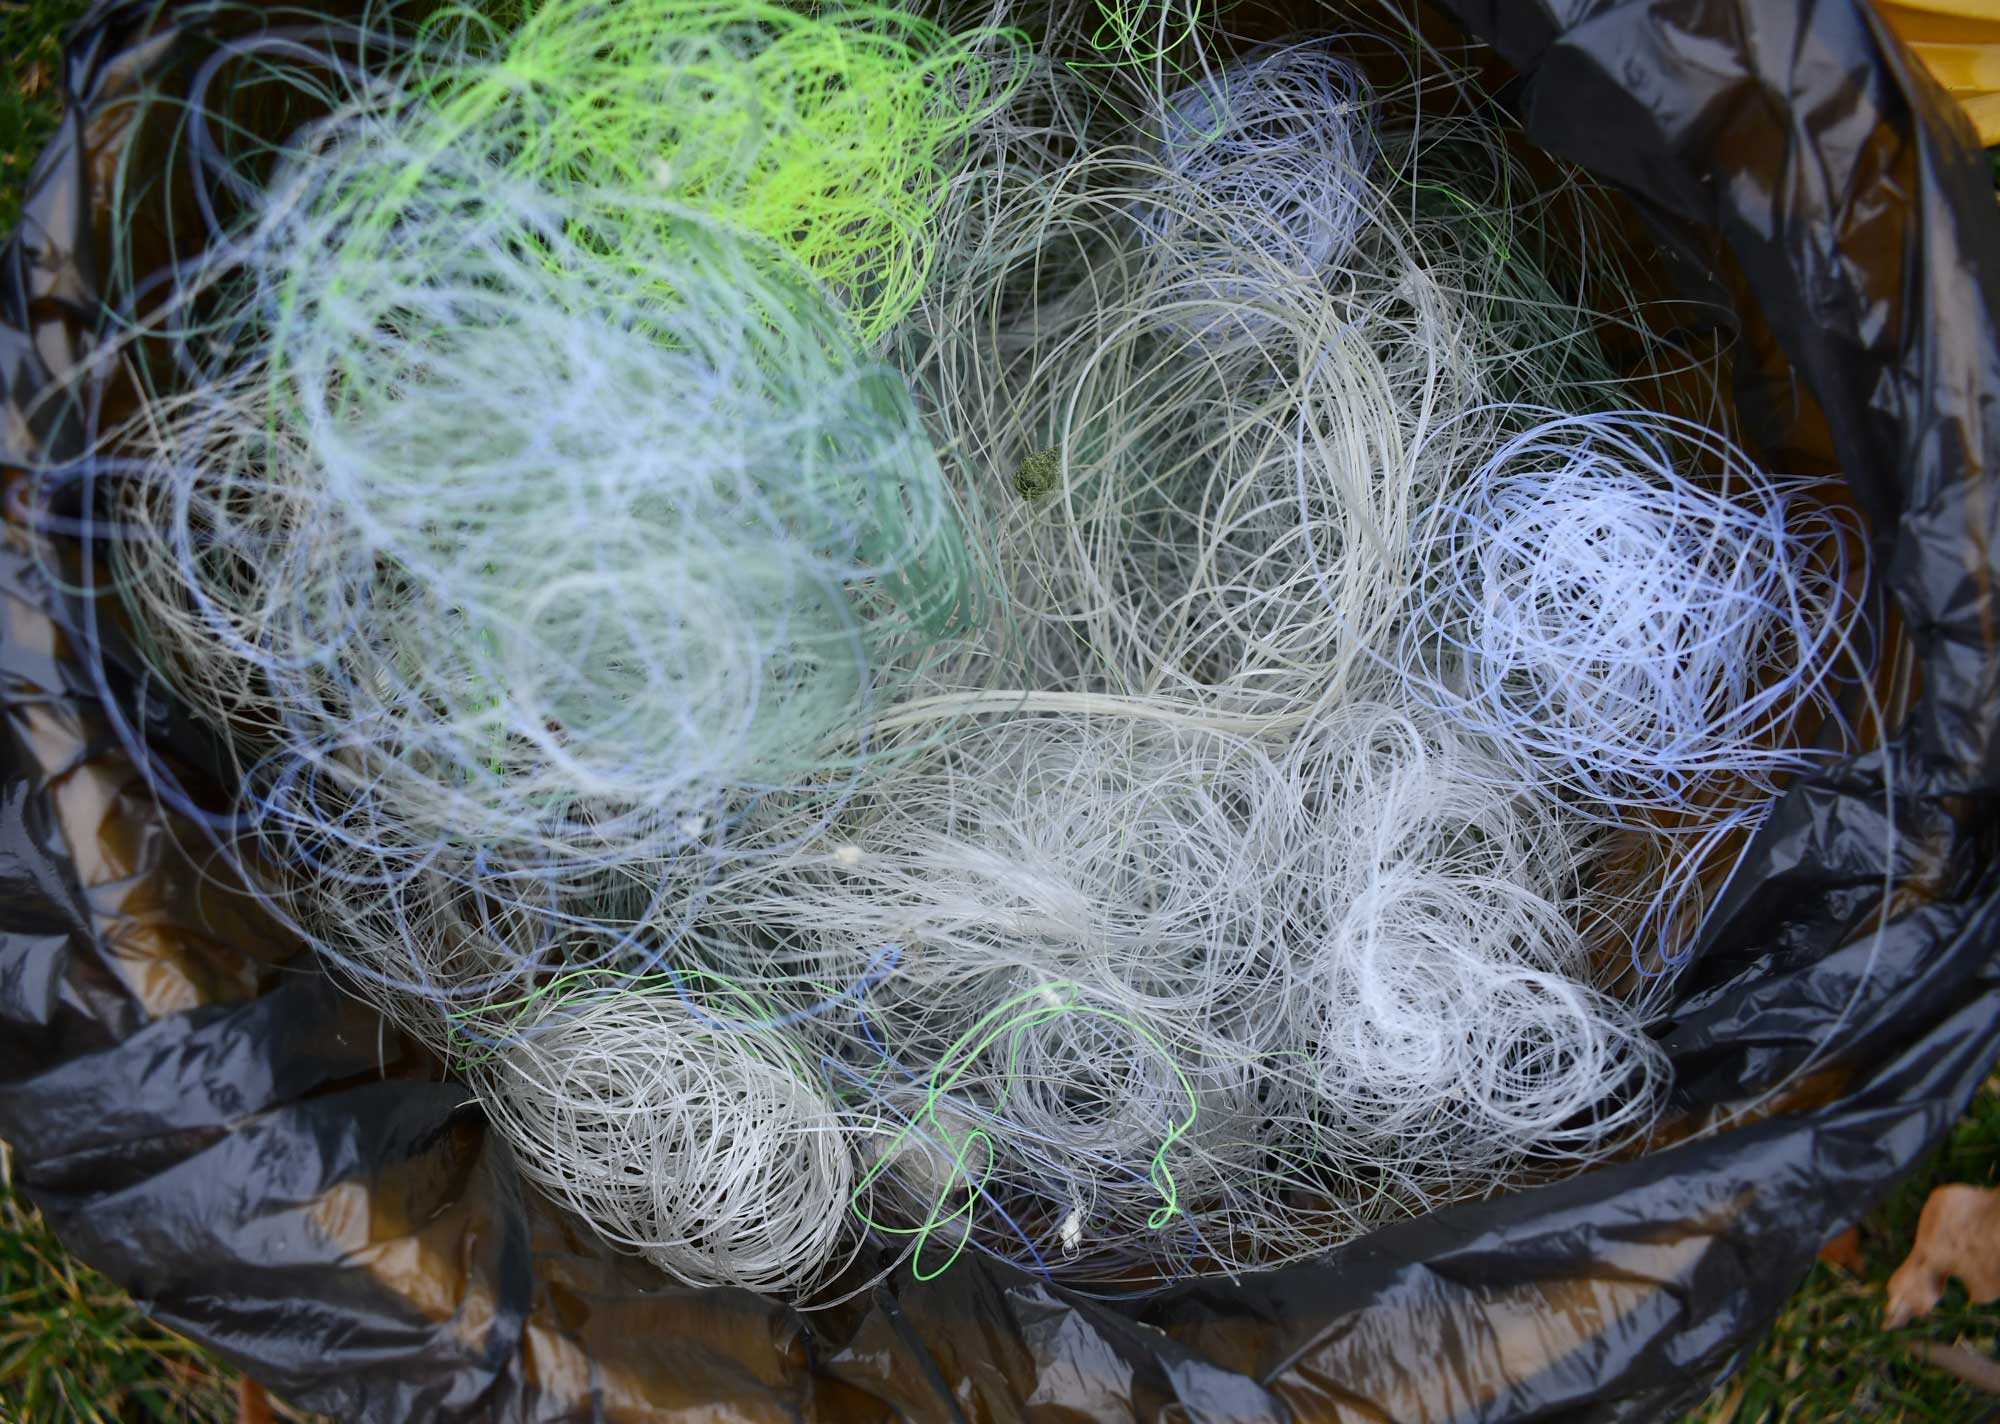 Recycle your fishing line to avoid injuring or killing wildlife